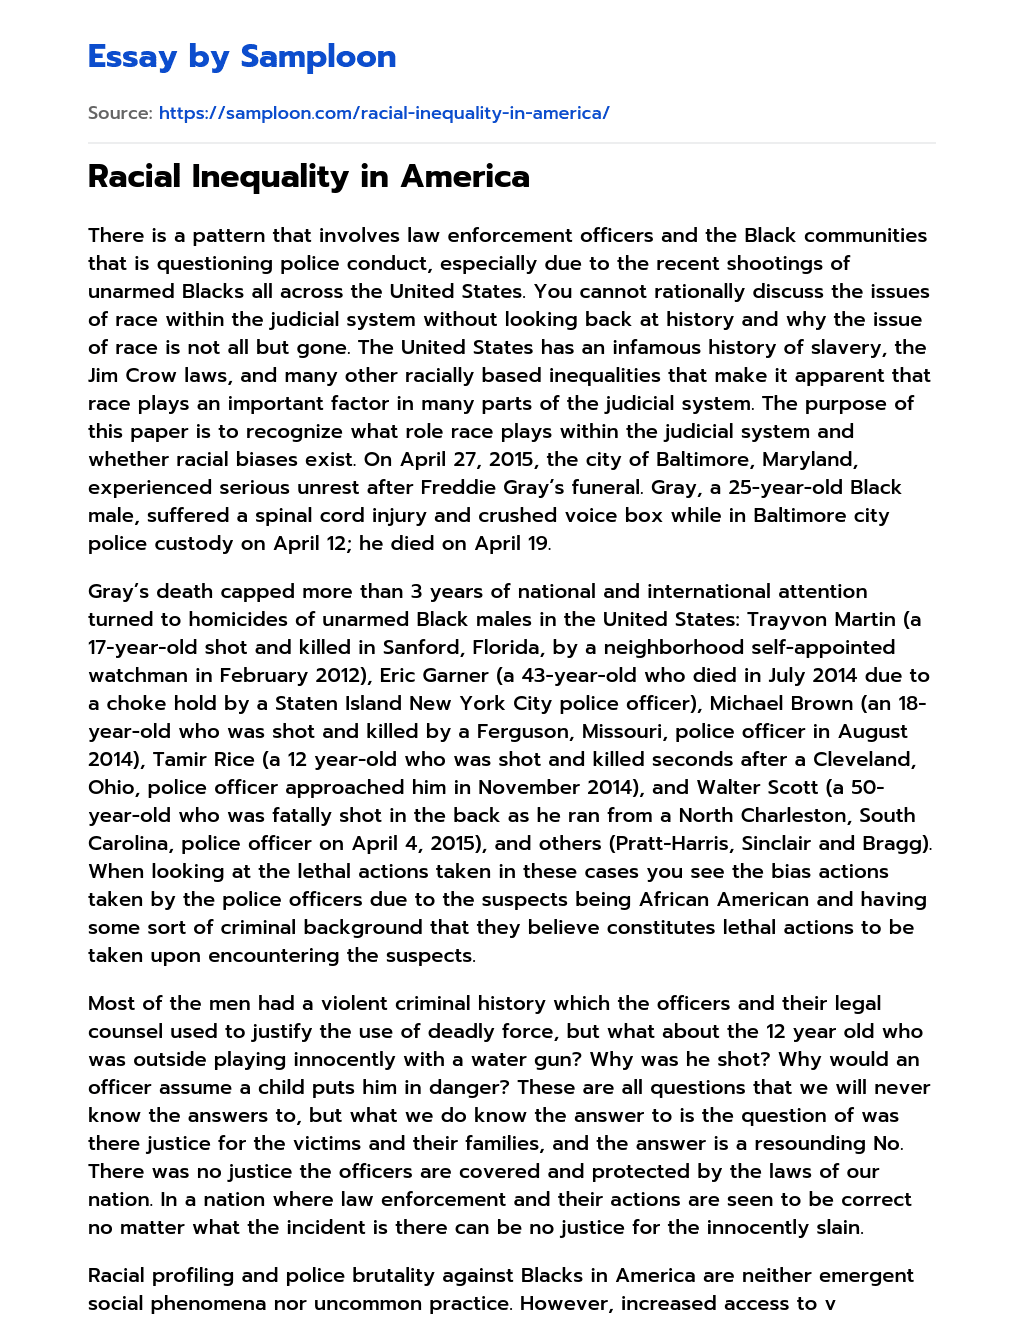 college essay about racial identity